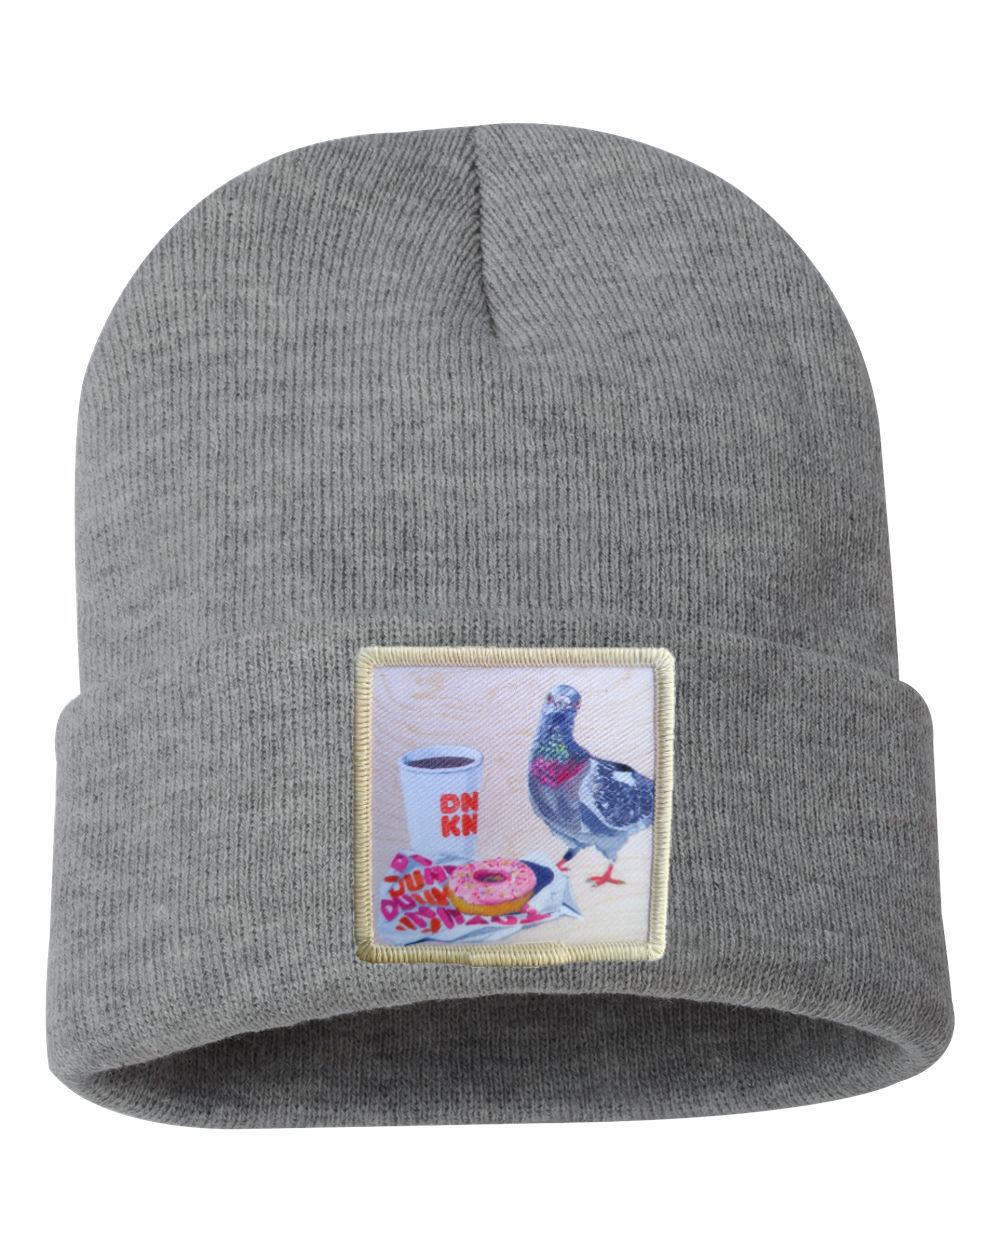 Pigeons Run on Donuts Beanie Hats Flyn Costello Grey  